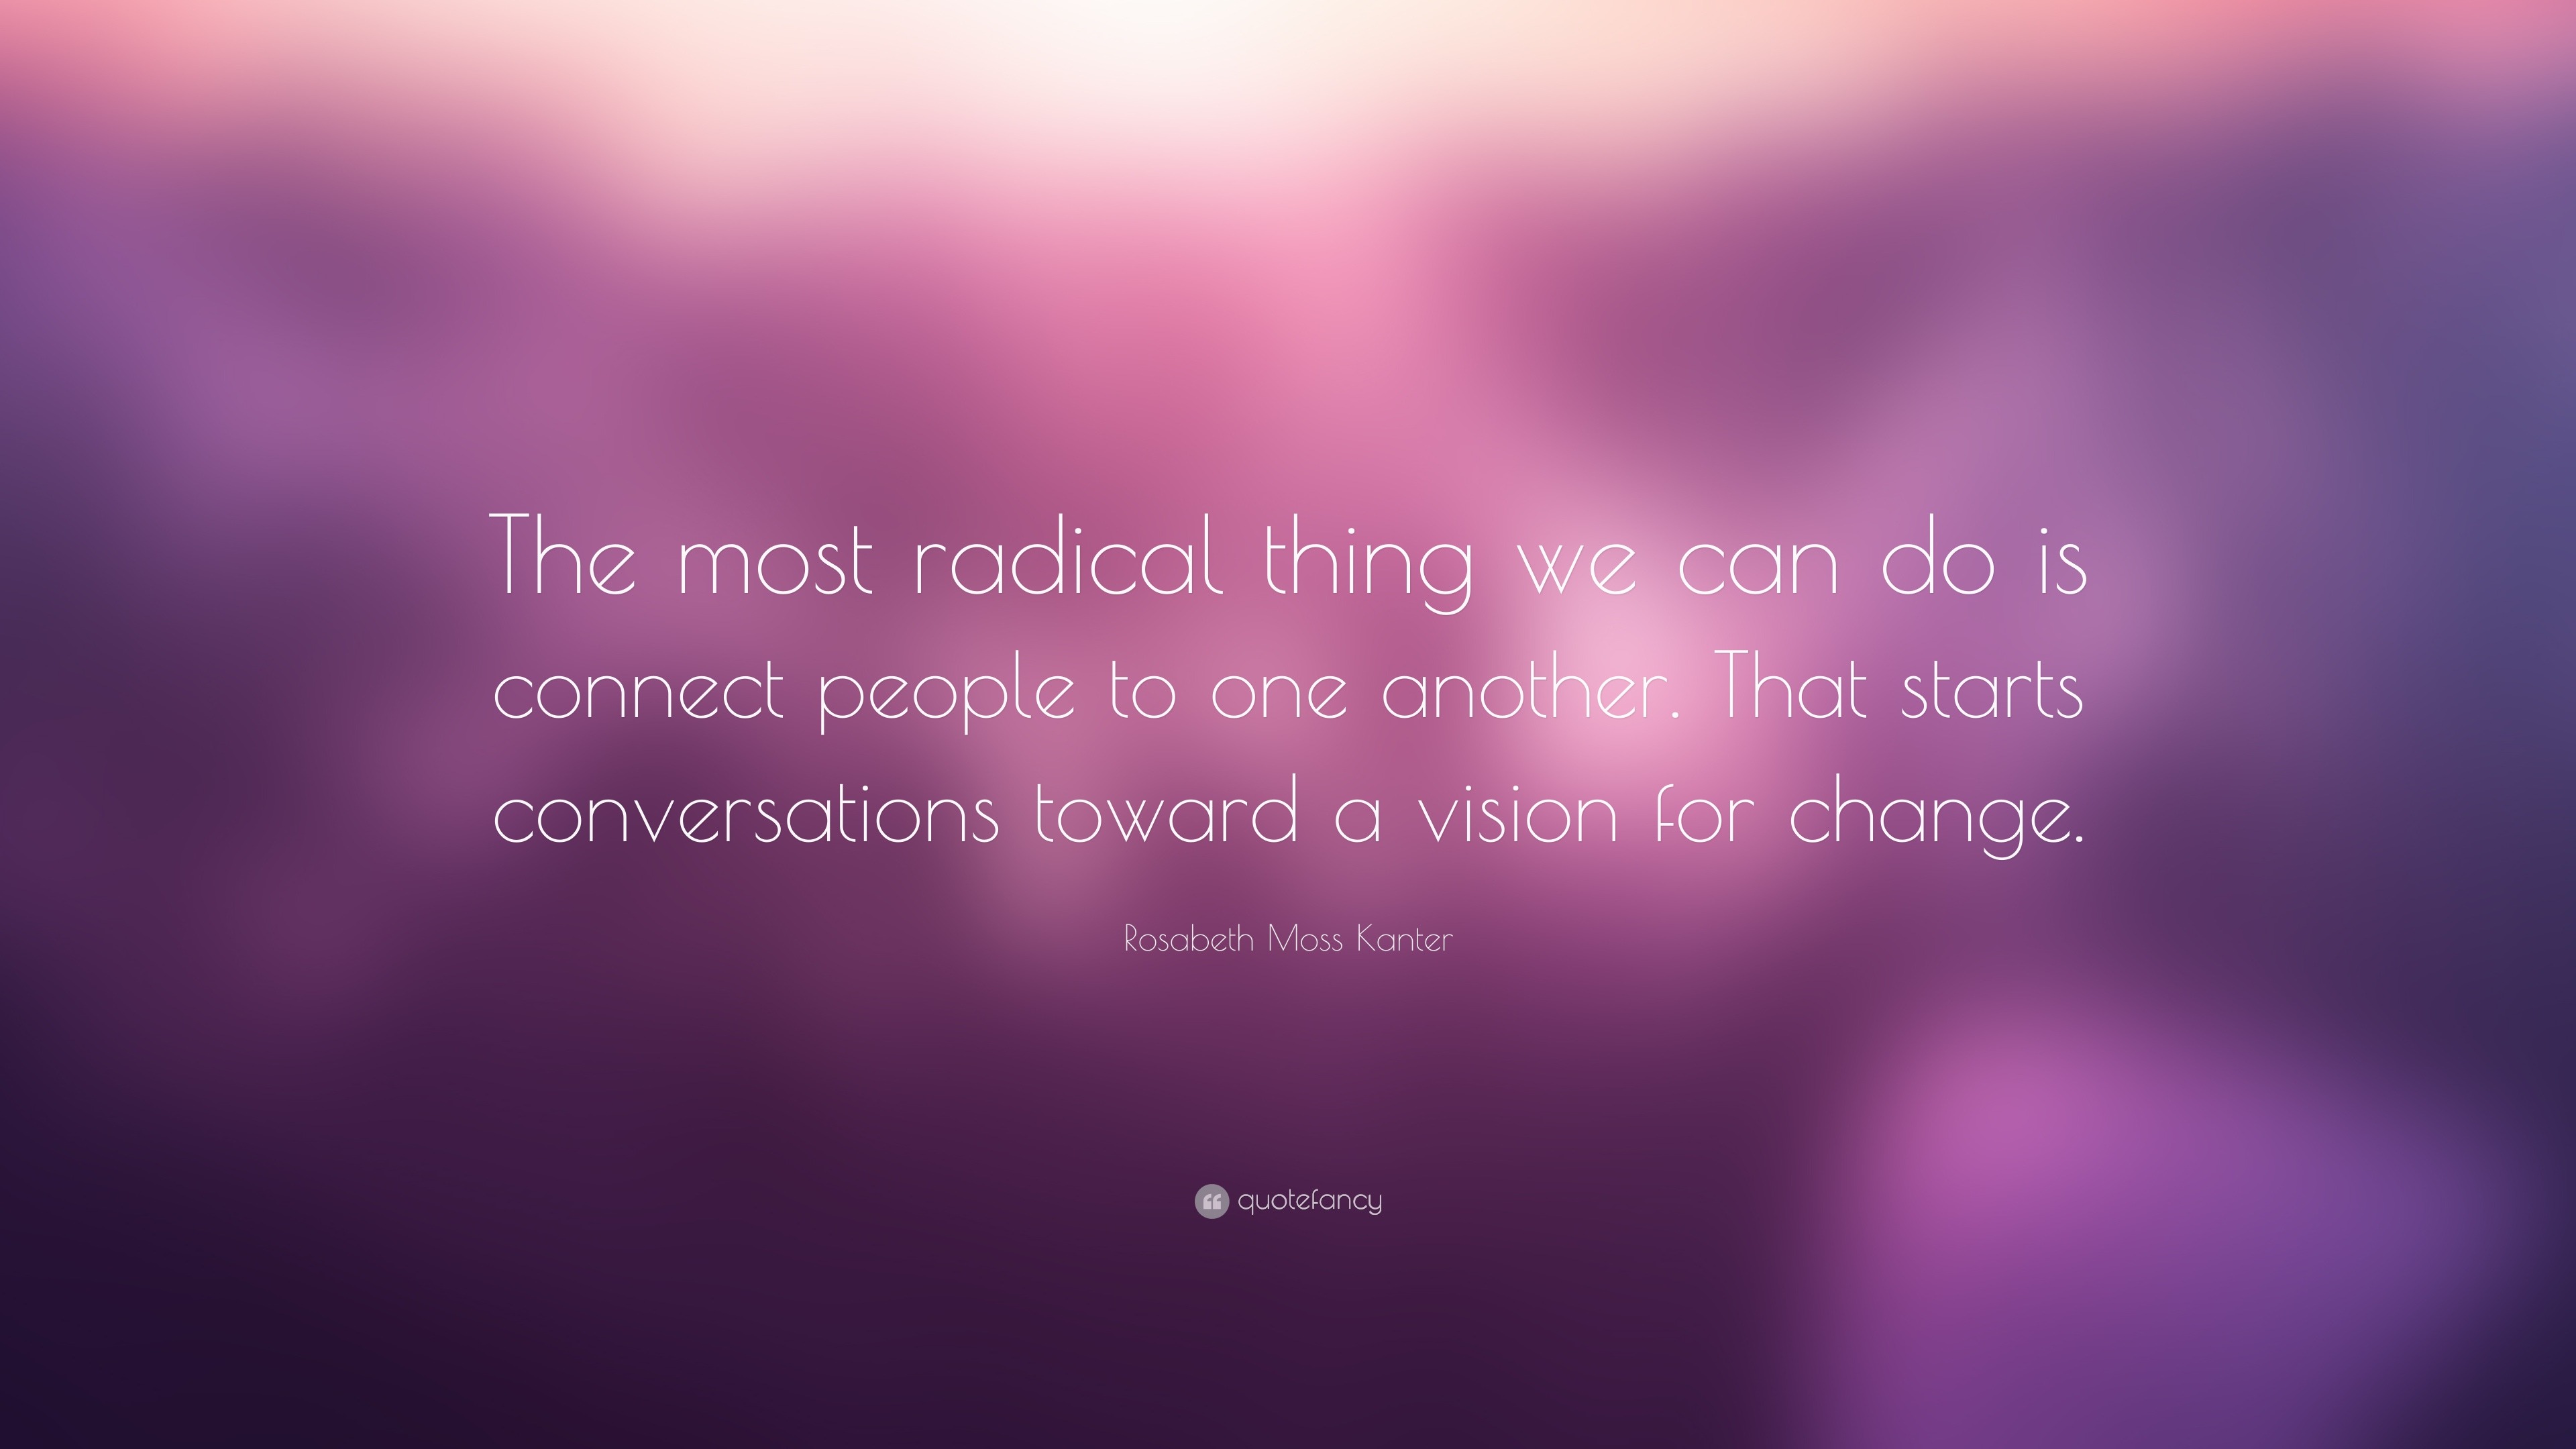 Rosabeth Moss Kanter Quote “the Most Radical Thing We Can Do Is Connect People To One Another